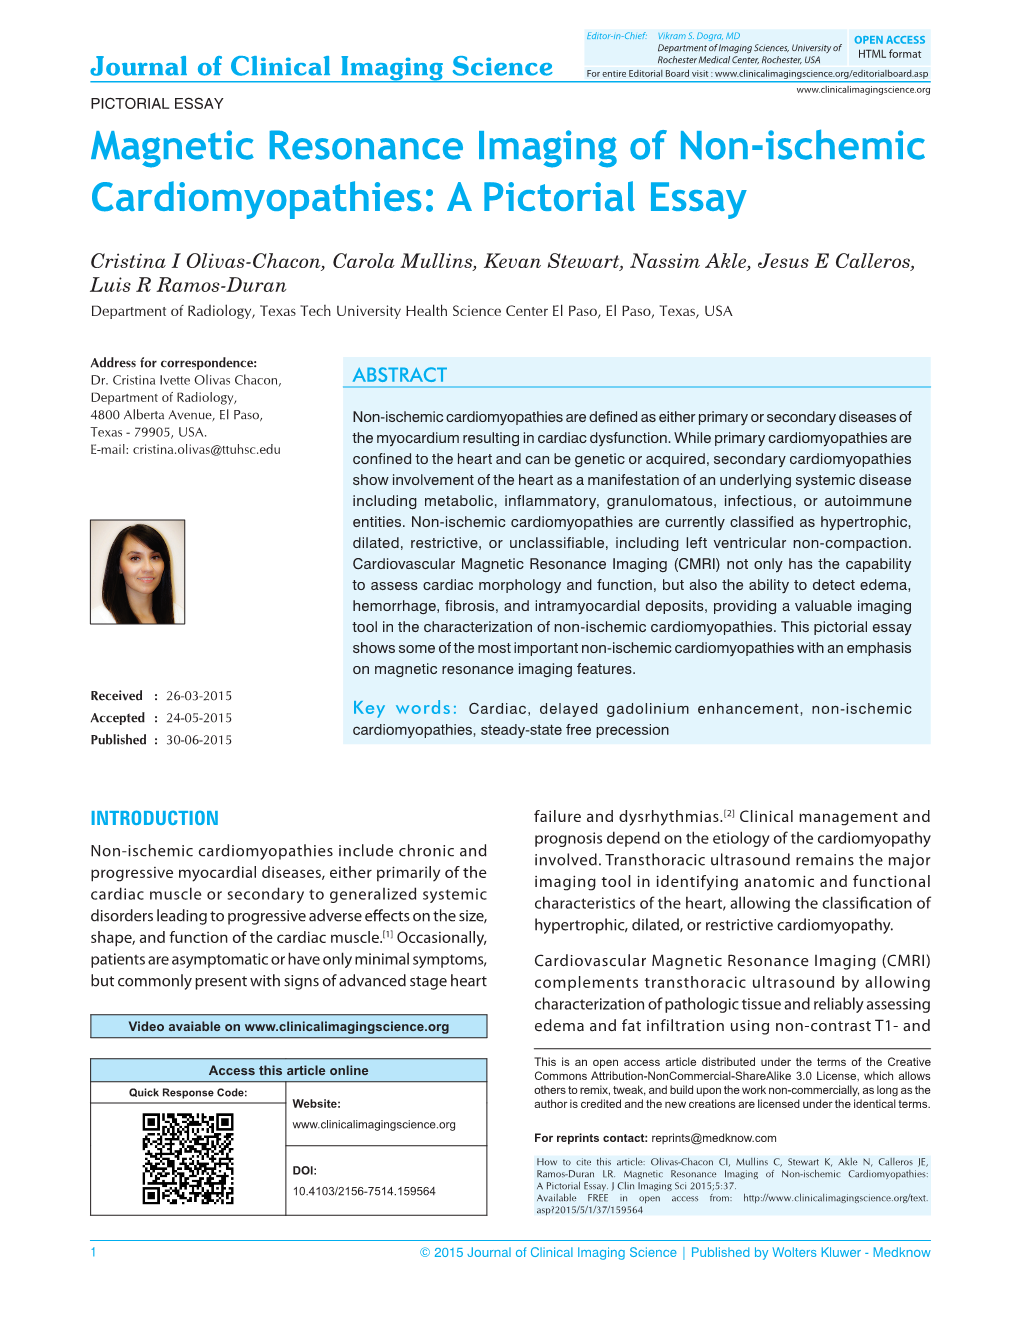 Magnetic Resonance Imaging of Non‑Ischemic Cardiomyopathies: a Pictorial Essay